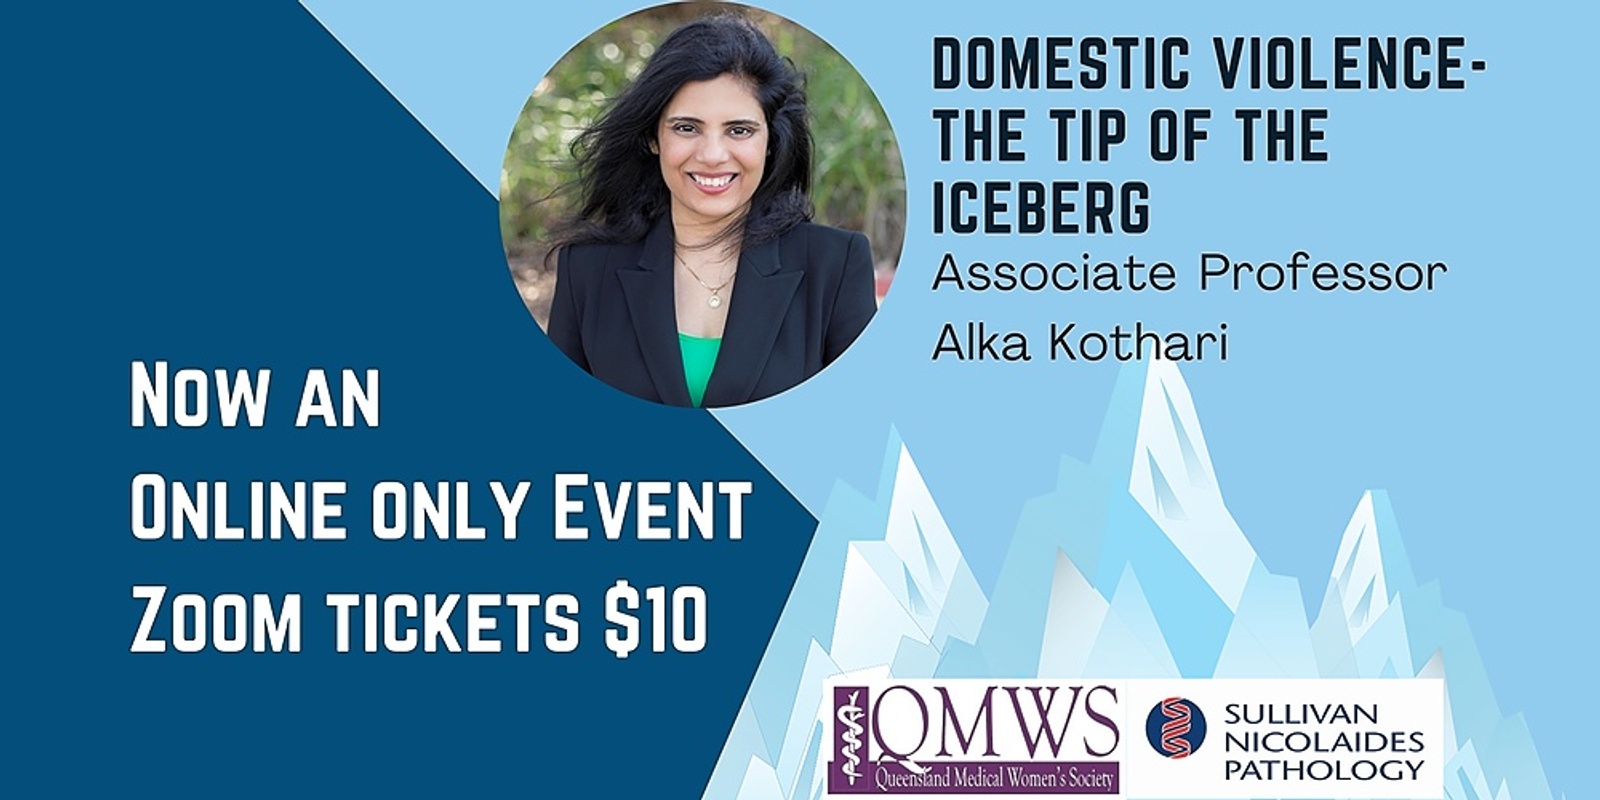 Banner image for QMWS: Domestic Violence - The Tip of the Iceberg with Assoc Prof Alka Kothari